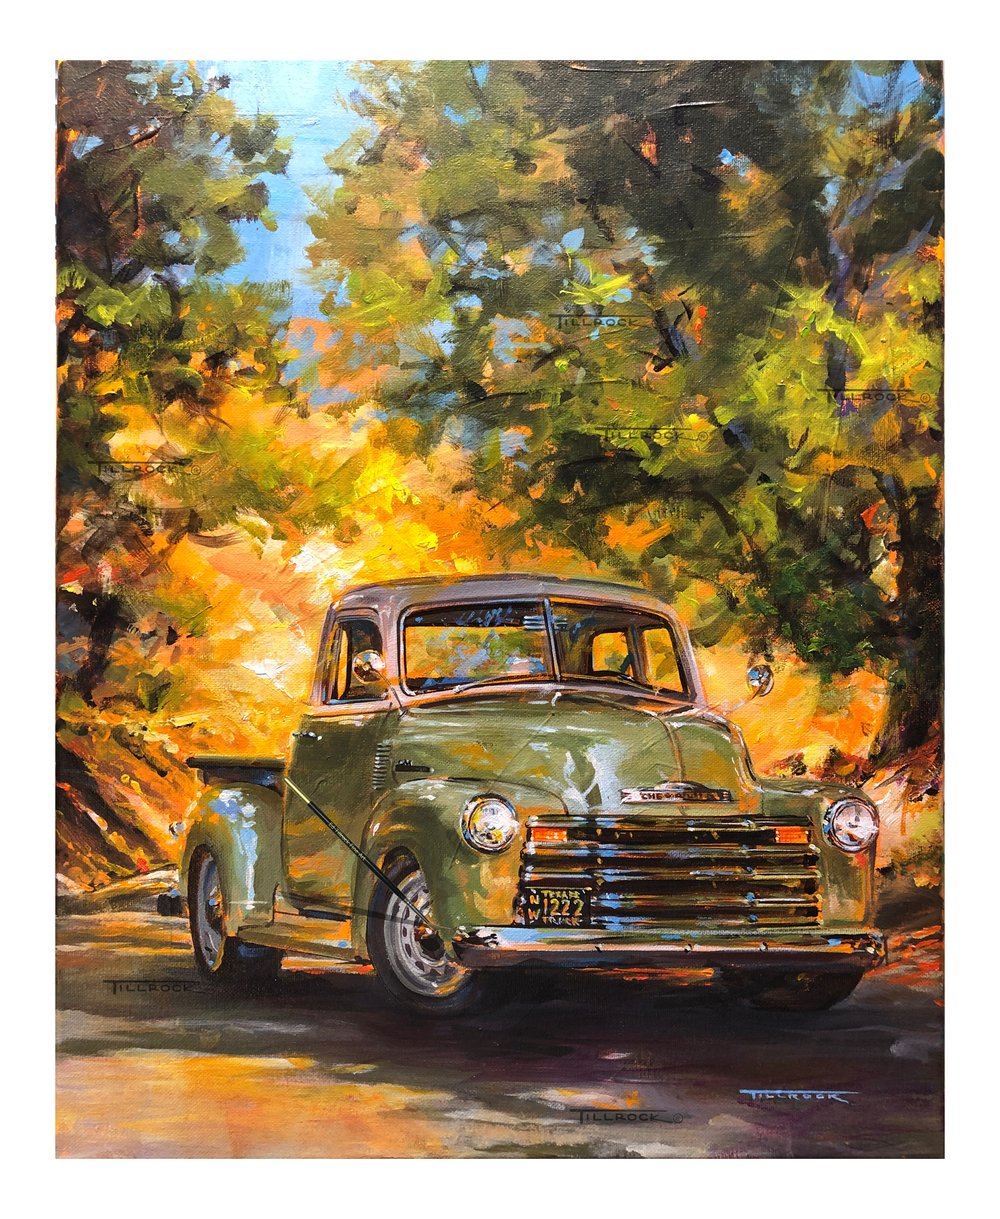 Image of "Olive" 1950 Chevy Thriftmaster Painting (16x20) or (24 x 30) Signed & Numbered Giclee' Prints 